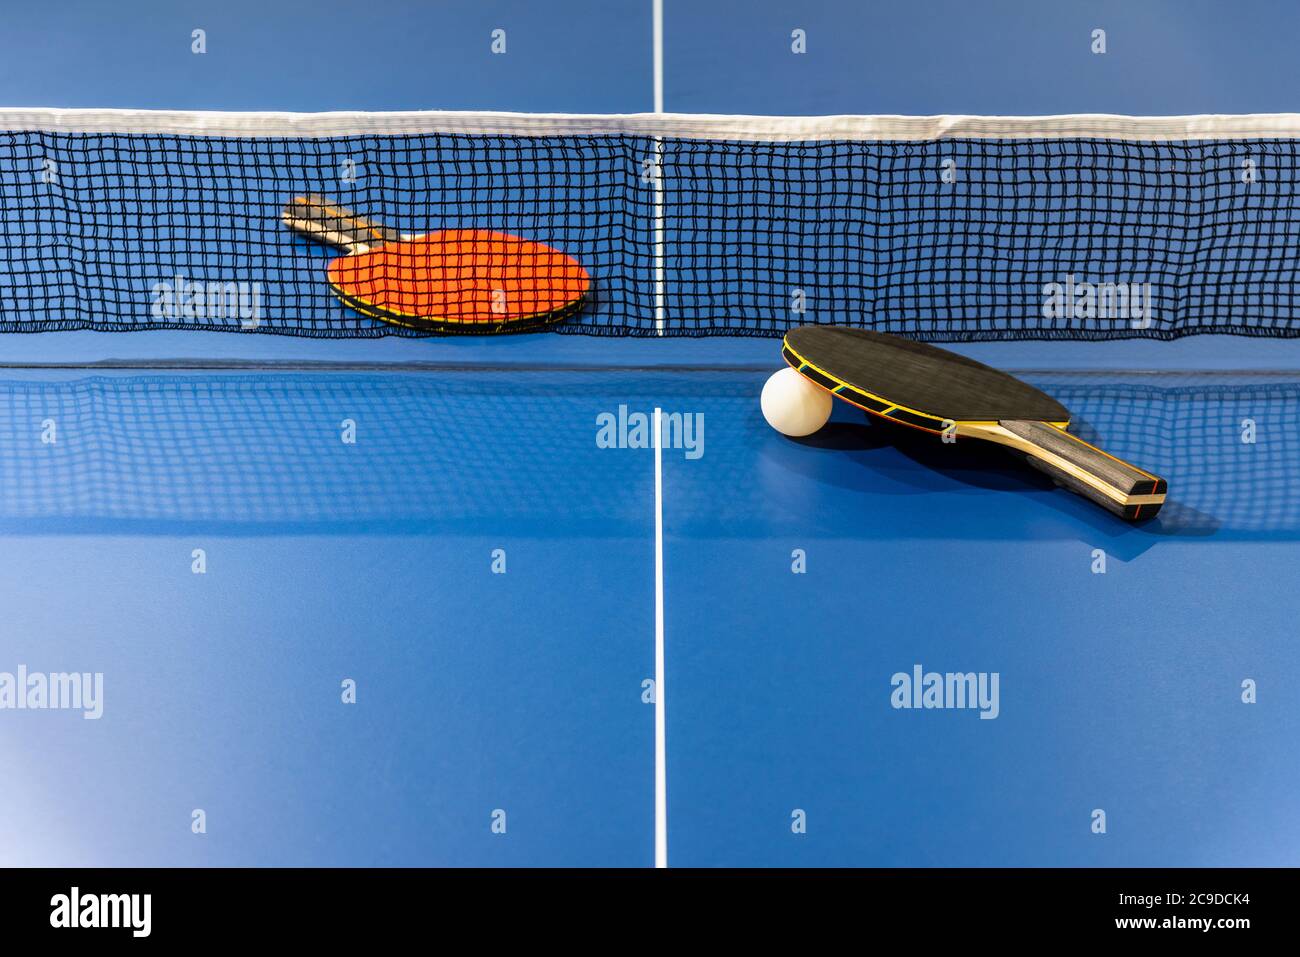 Black and red table tennis racket and a white ball on the blue ping pong table with a net, Two table tennis paddle is a sports competition equipment i Stock Photo